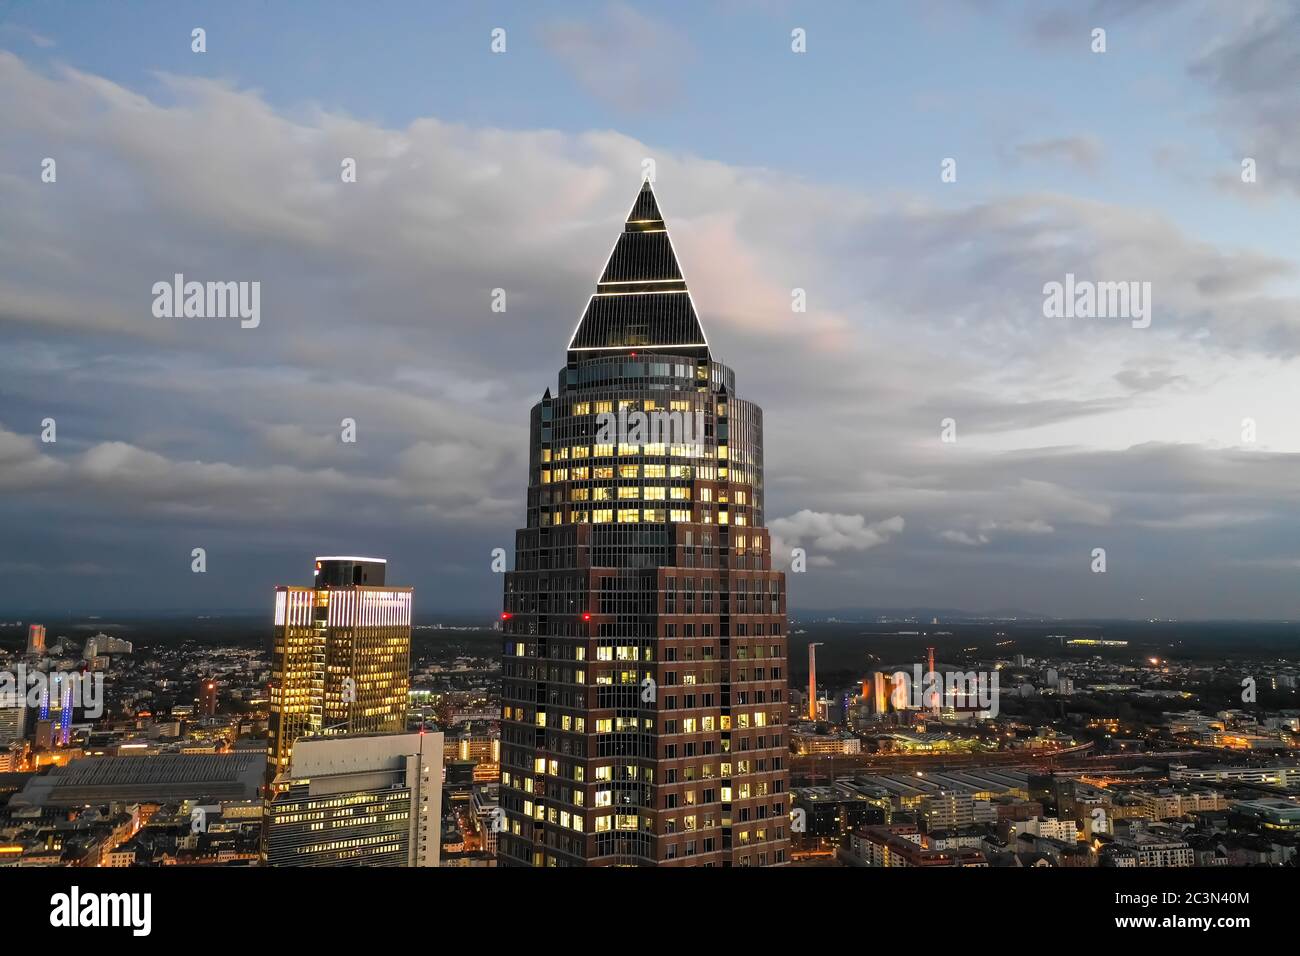 Circa November 2019: Incredible Aerial Close Up View of Messeturm in Frankfurt am Main, Germany Skyline at Night with City Lights Stock Photo